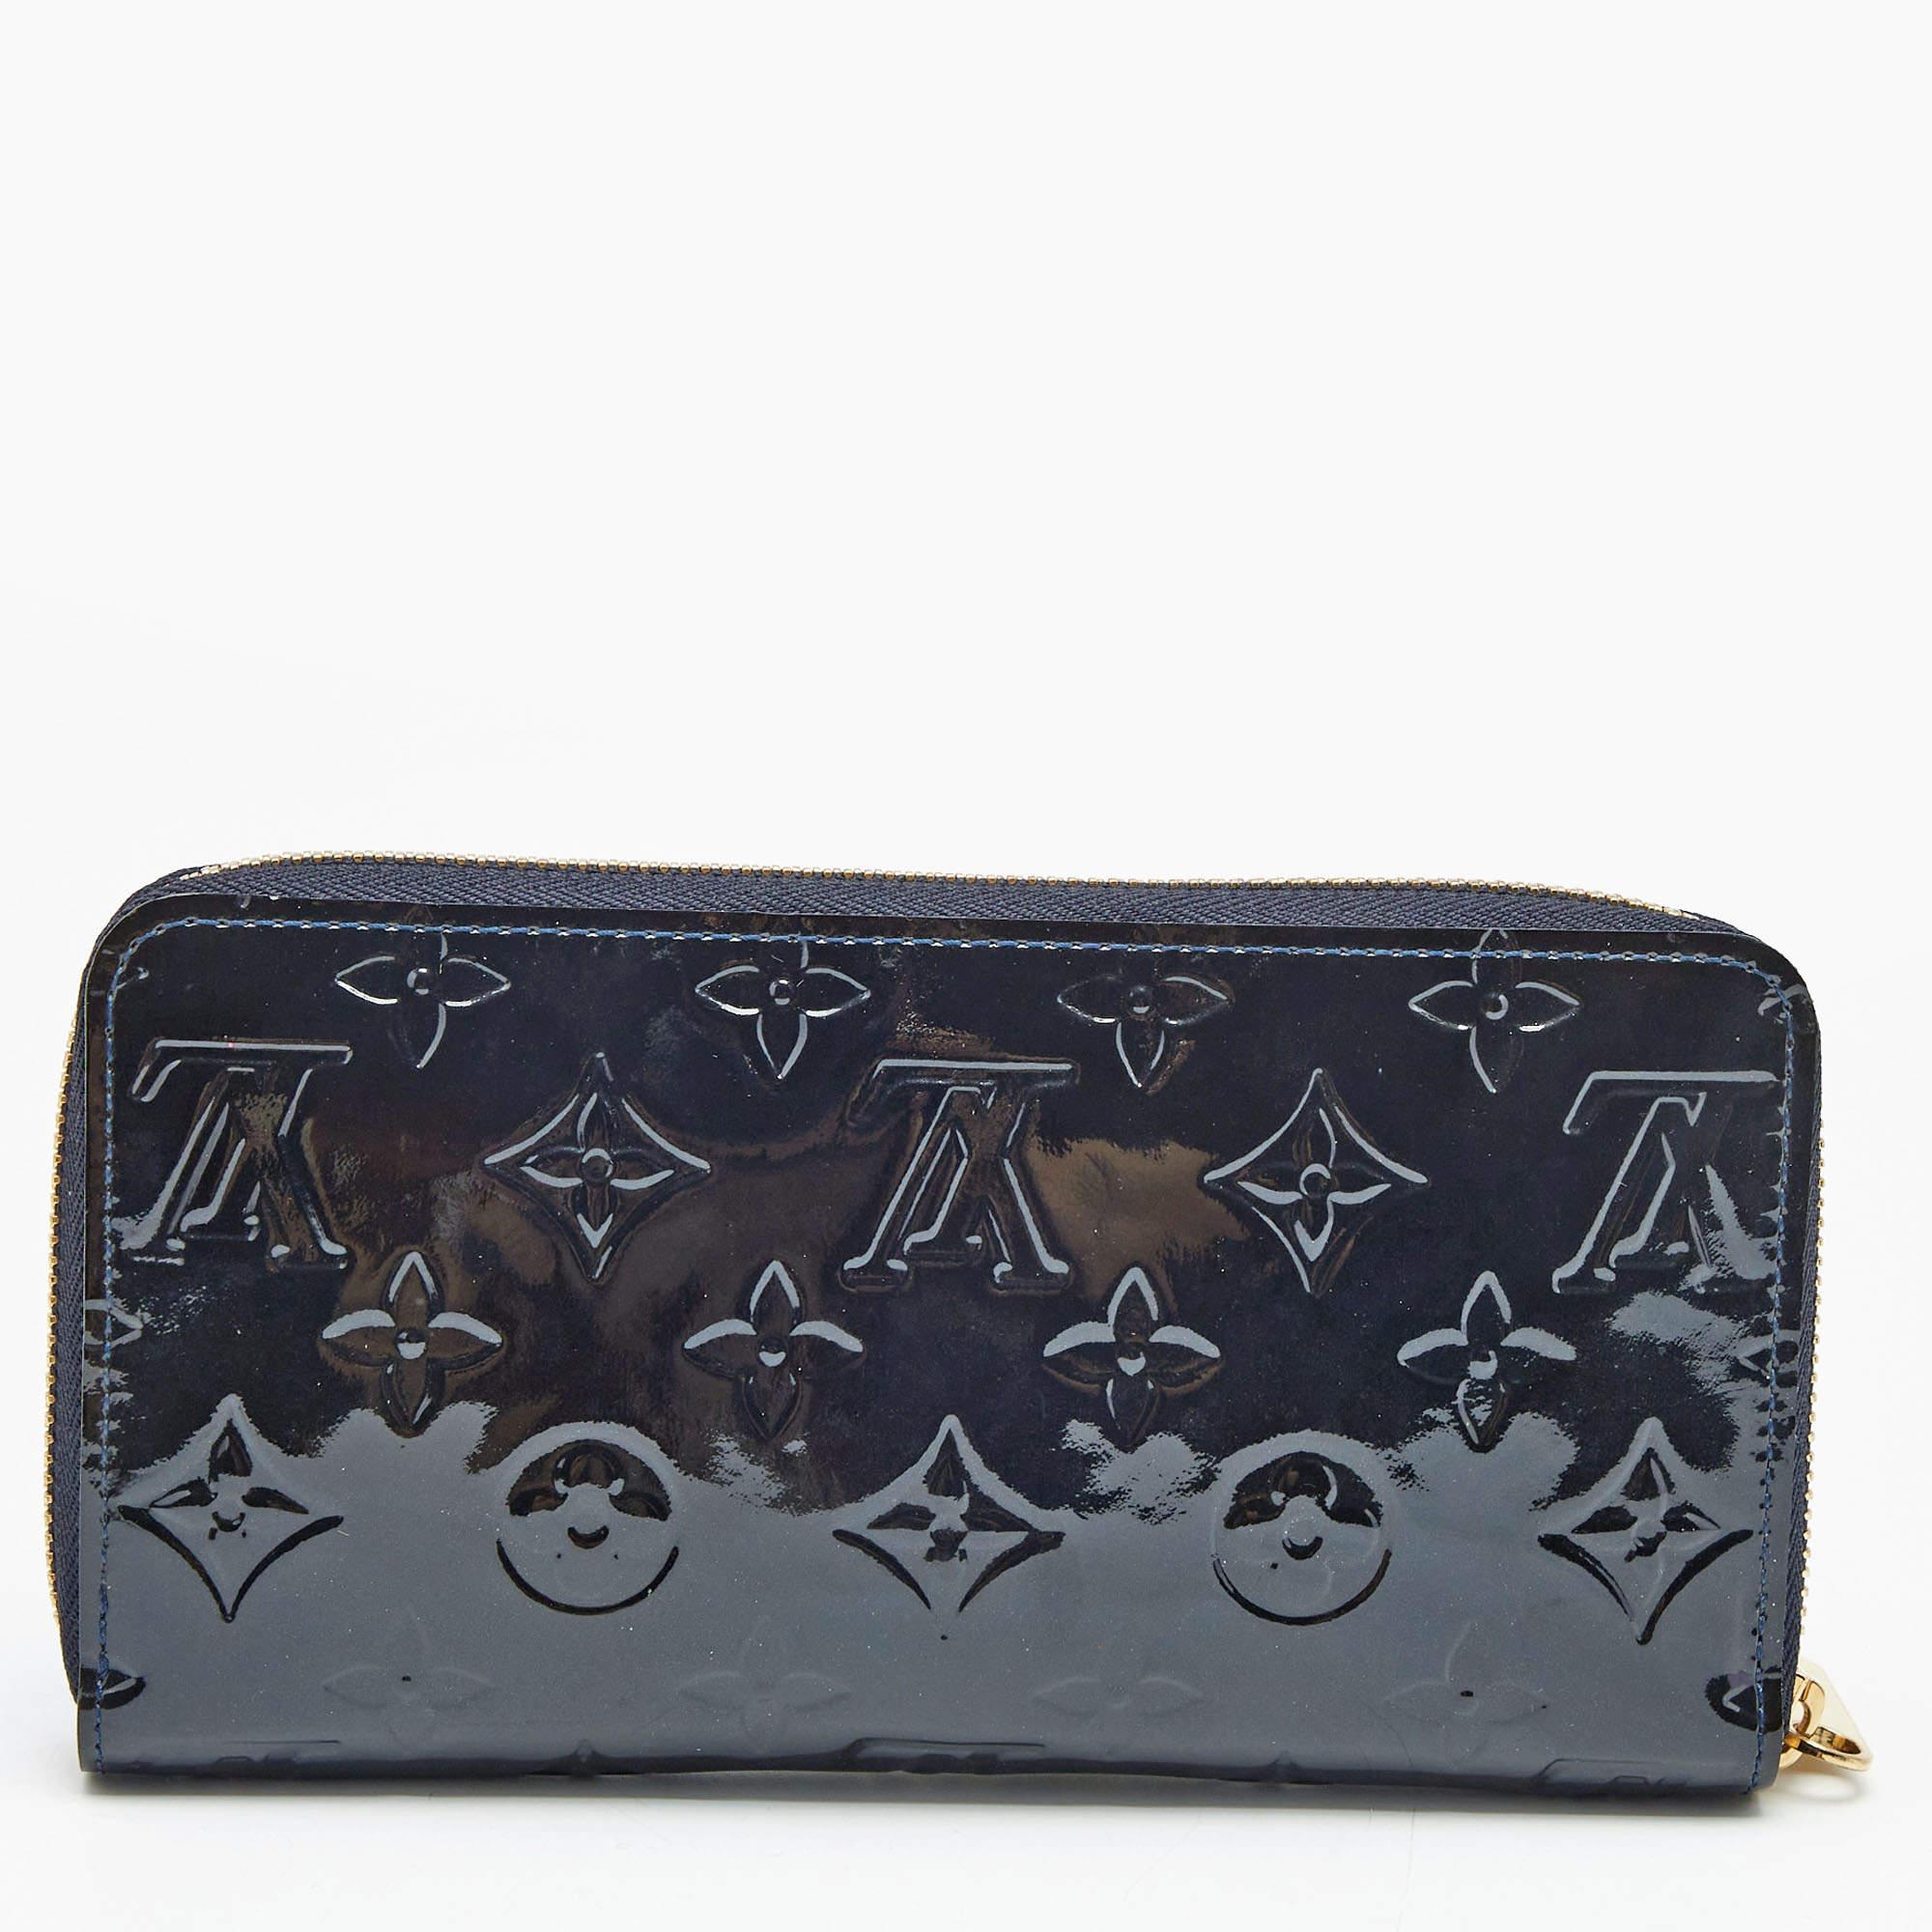 With a rich heritage and meticulous workmanship, each creation of Louis Vuitton is sure to impress you with its notable features. This Zippy wallet is conveniently designed for everyday use. Crafted from Infini Monogram vernis, it is paired with a